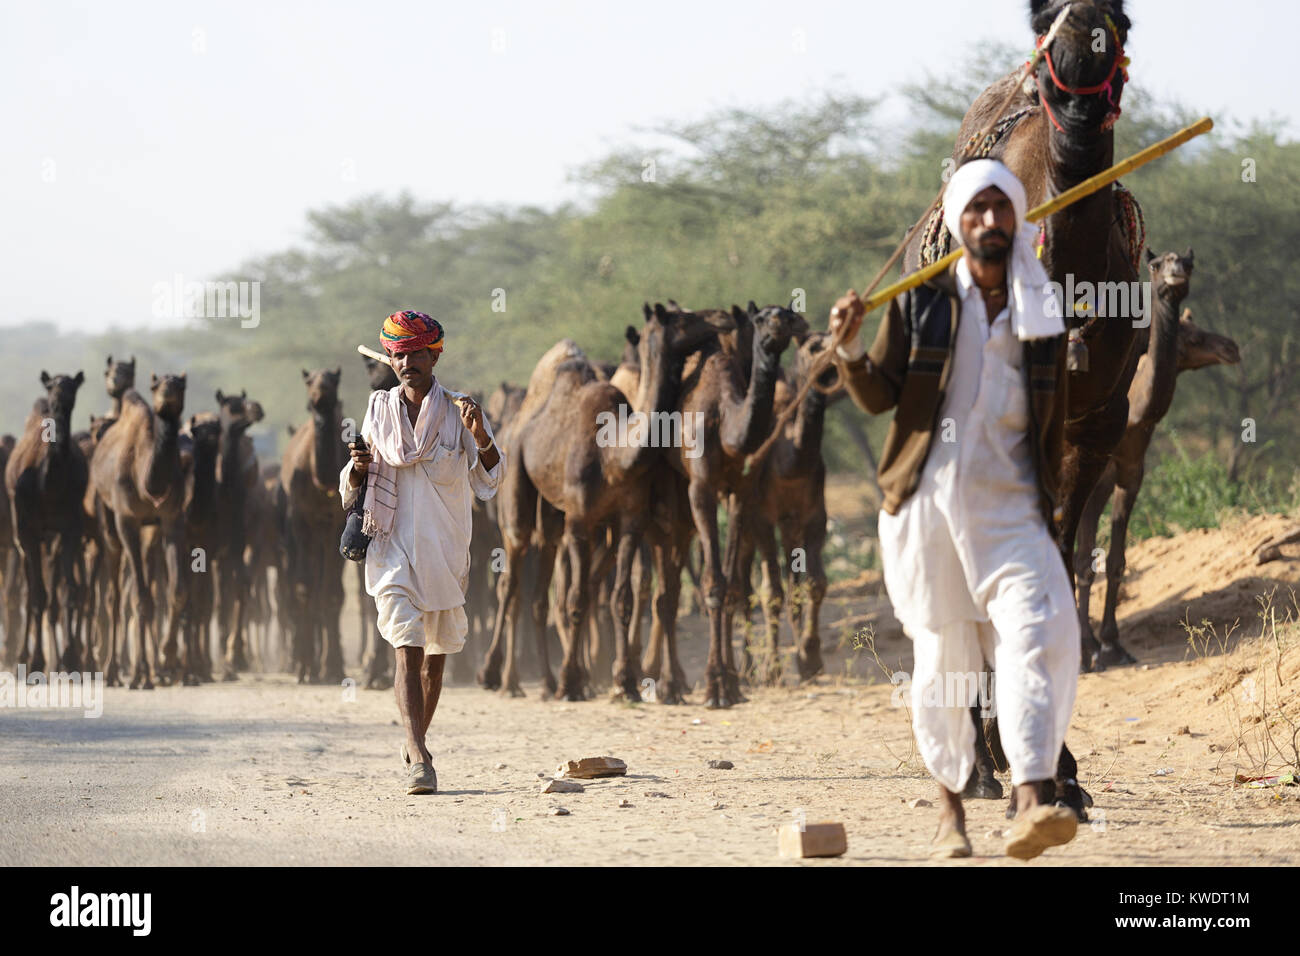 https://c8.alamy.com/comp/KWDT1M/traders-wearing-turbans-and-traditional-clothing-taking-their-herd-KWDT1M.jpg